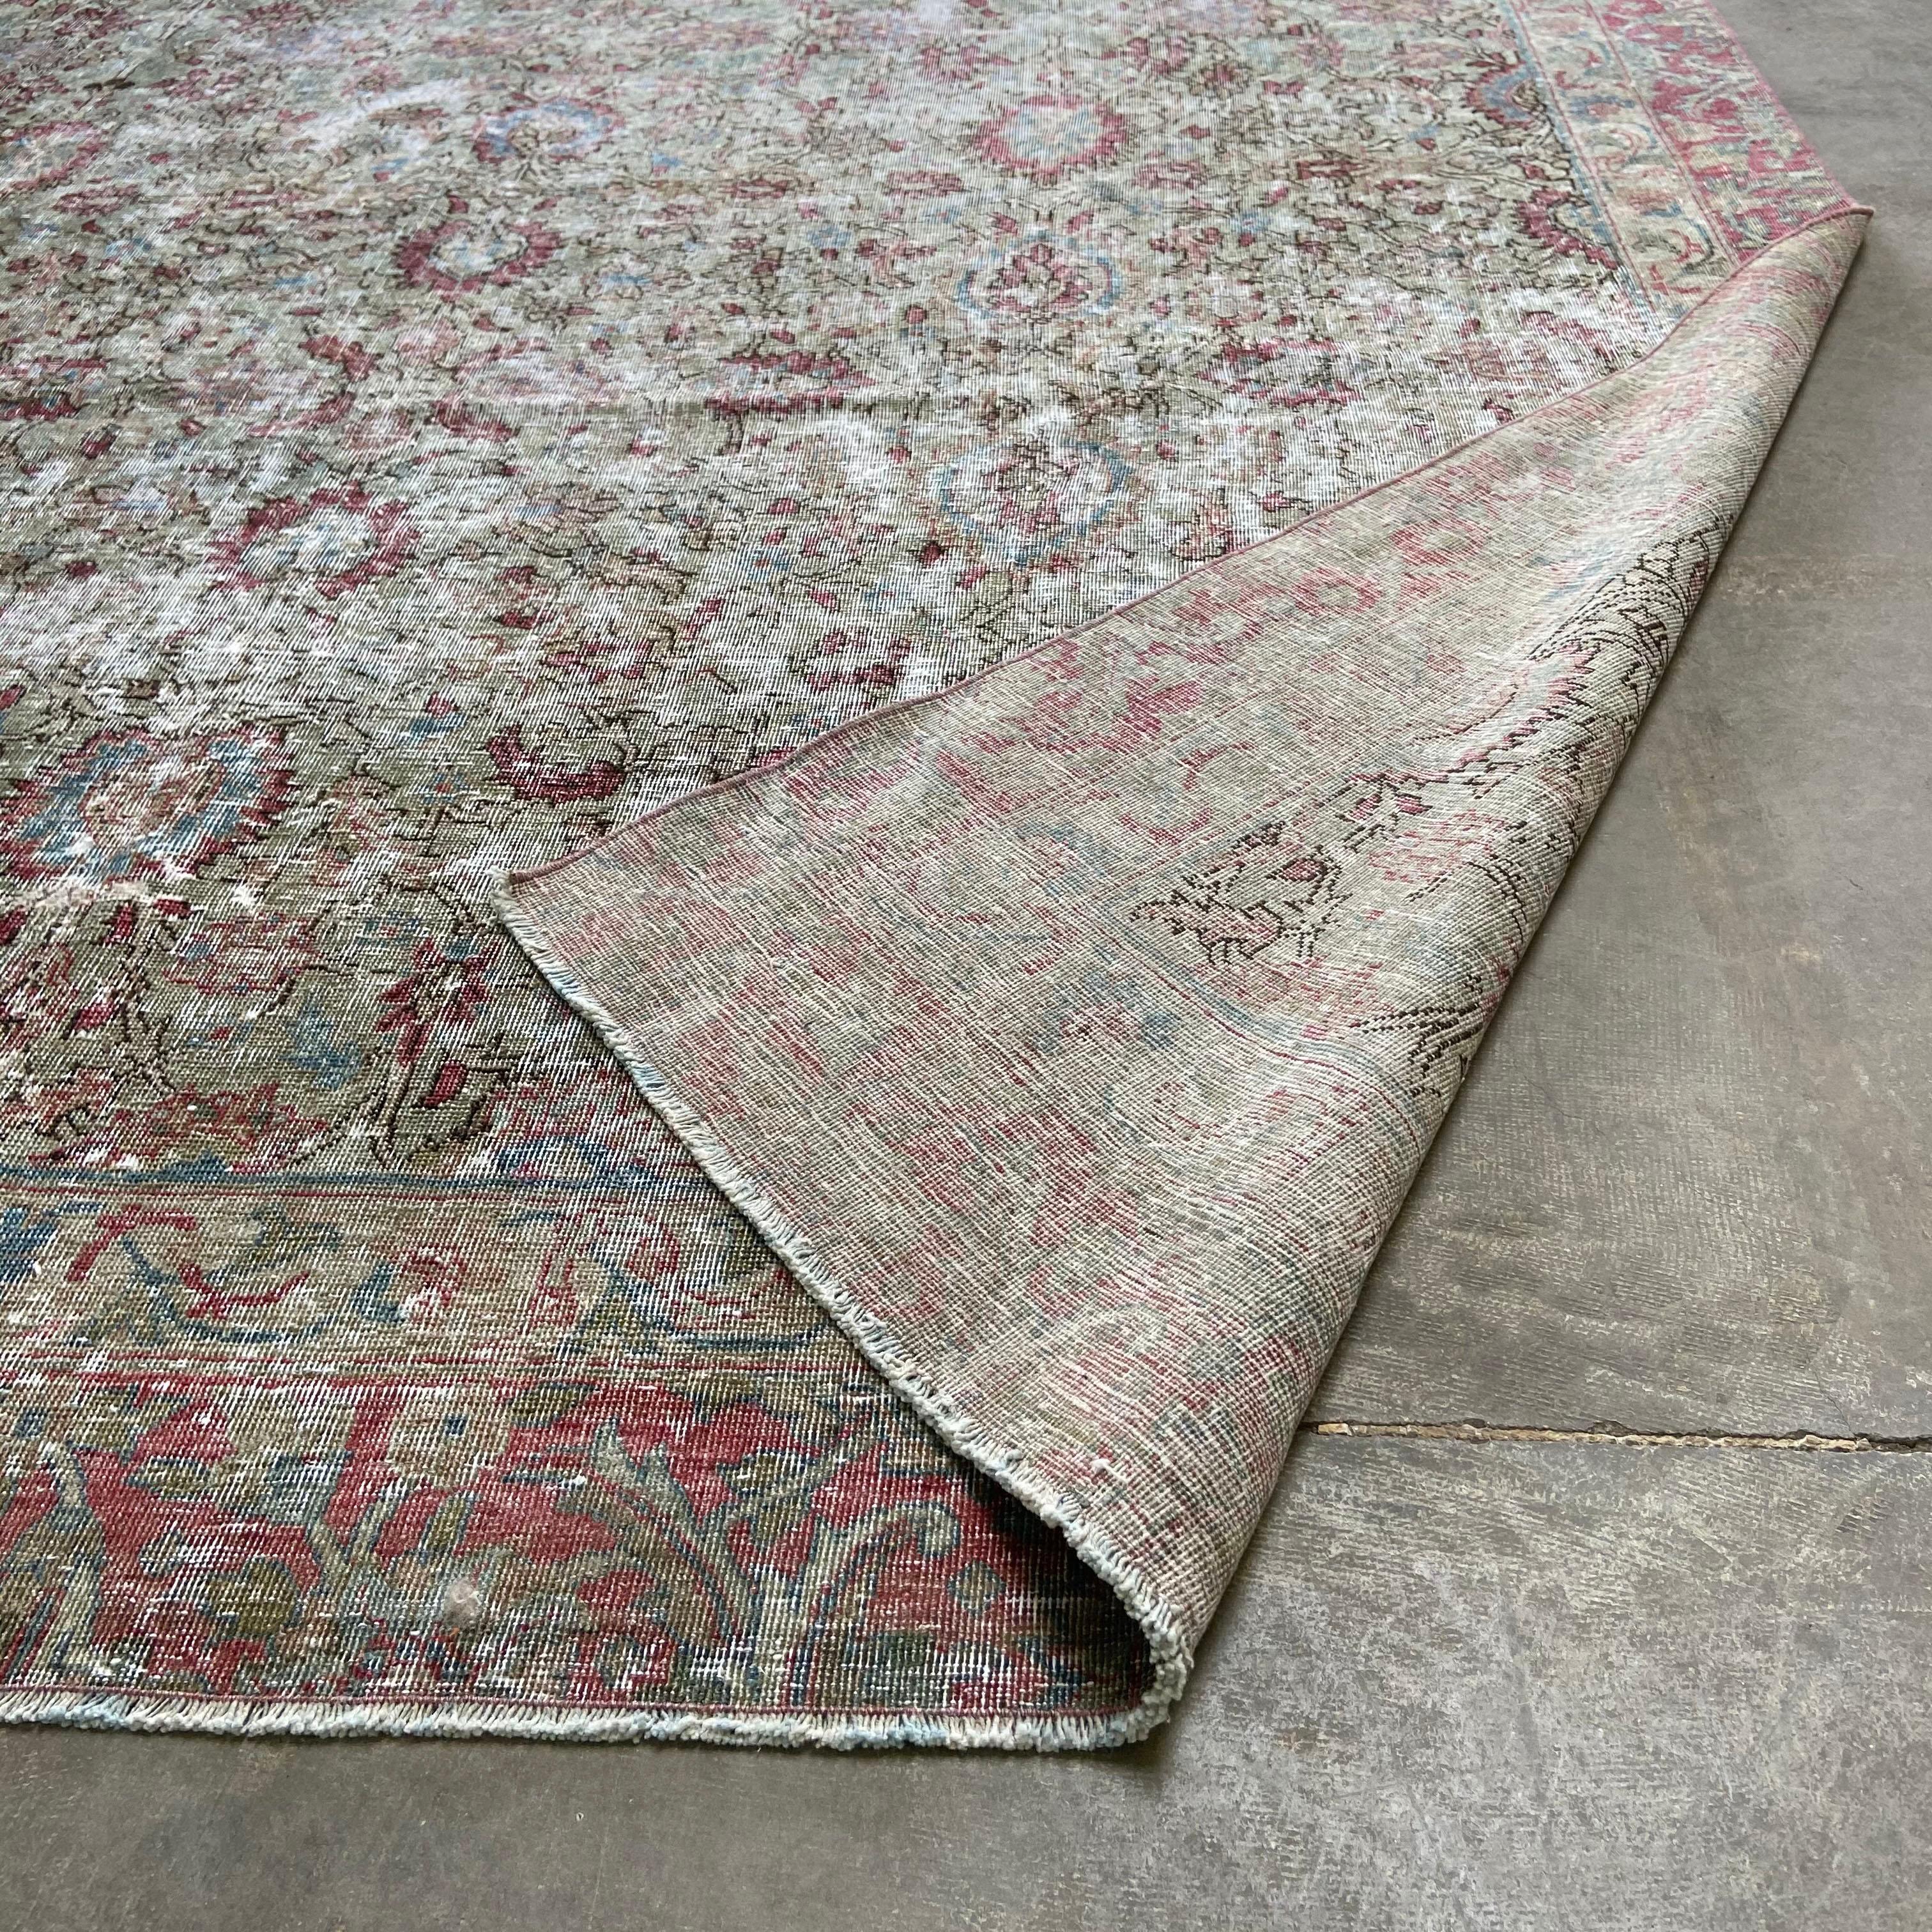 Vintage Turkish Rug with Faded Red and Moss Colors In Good Condition For Sale In Brea, CA